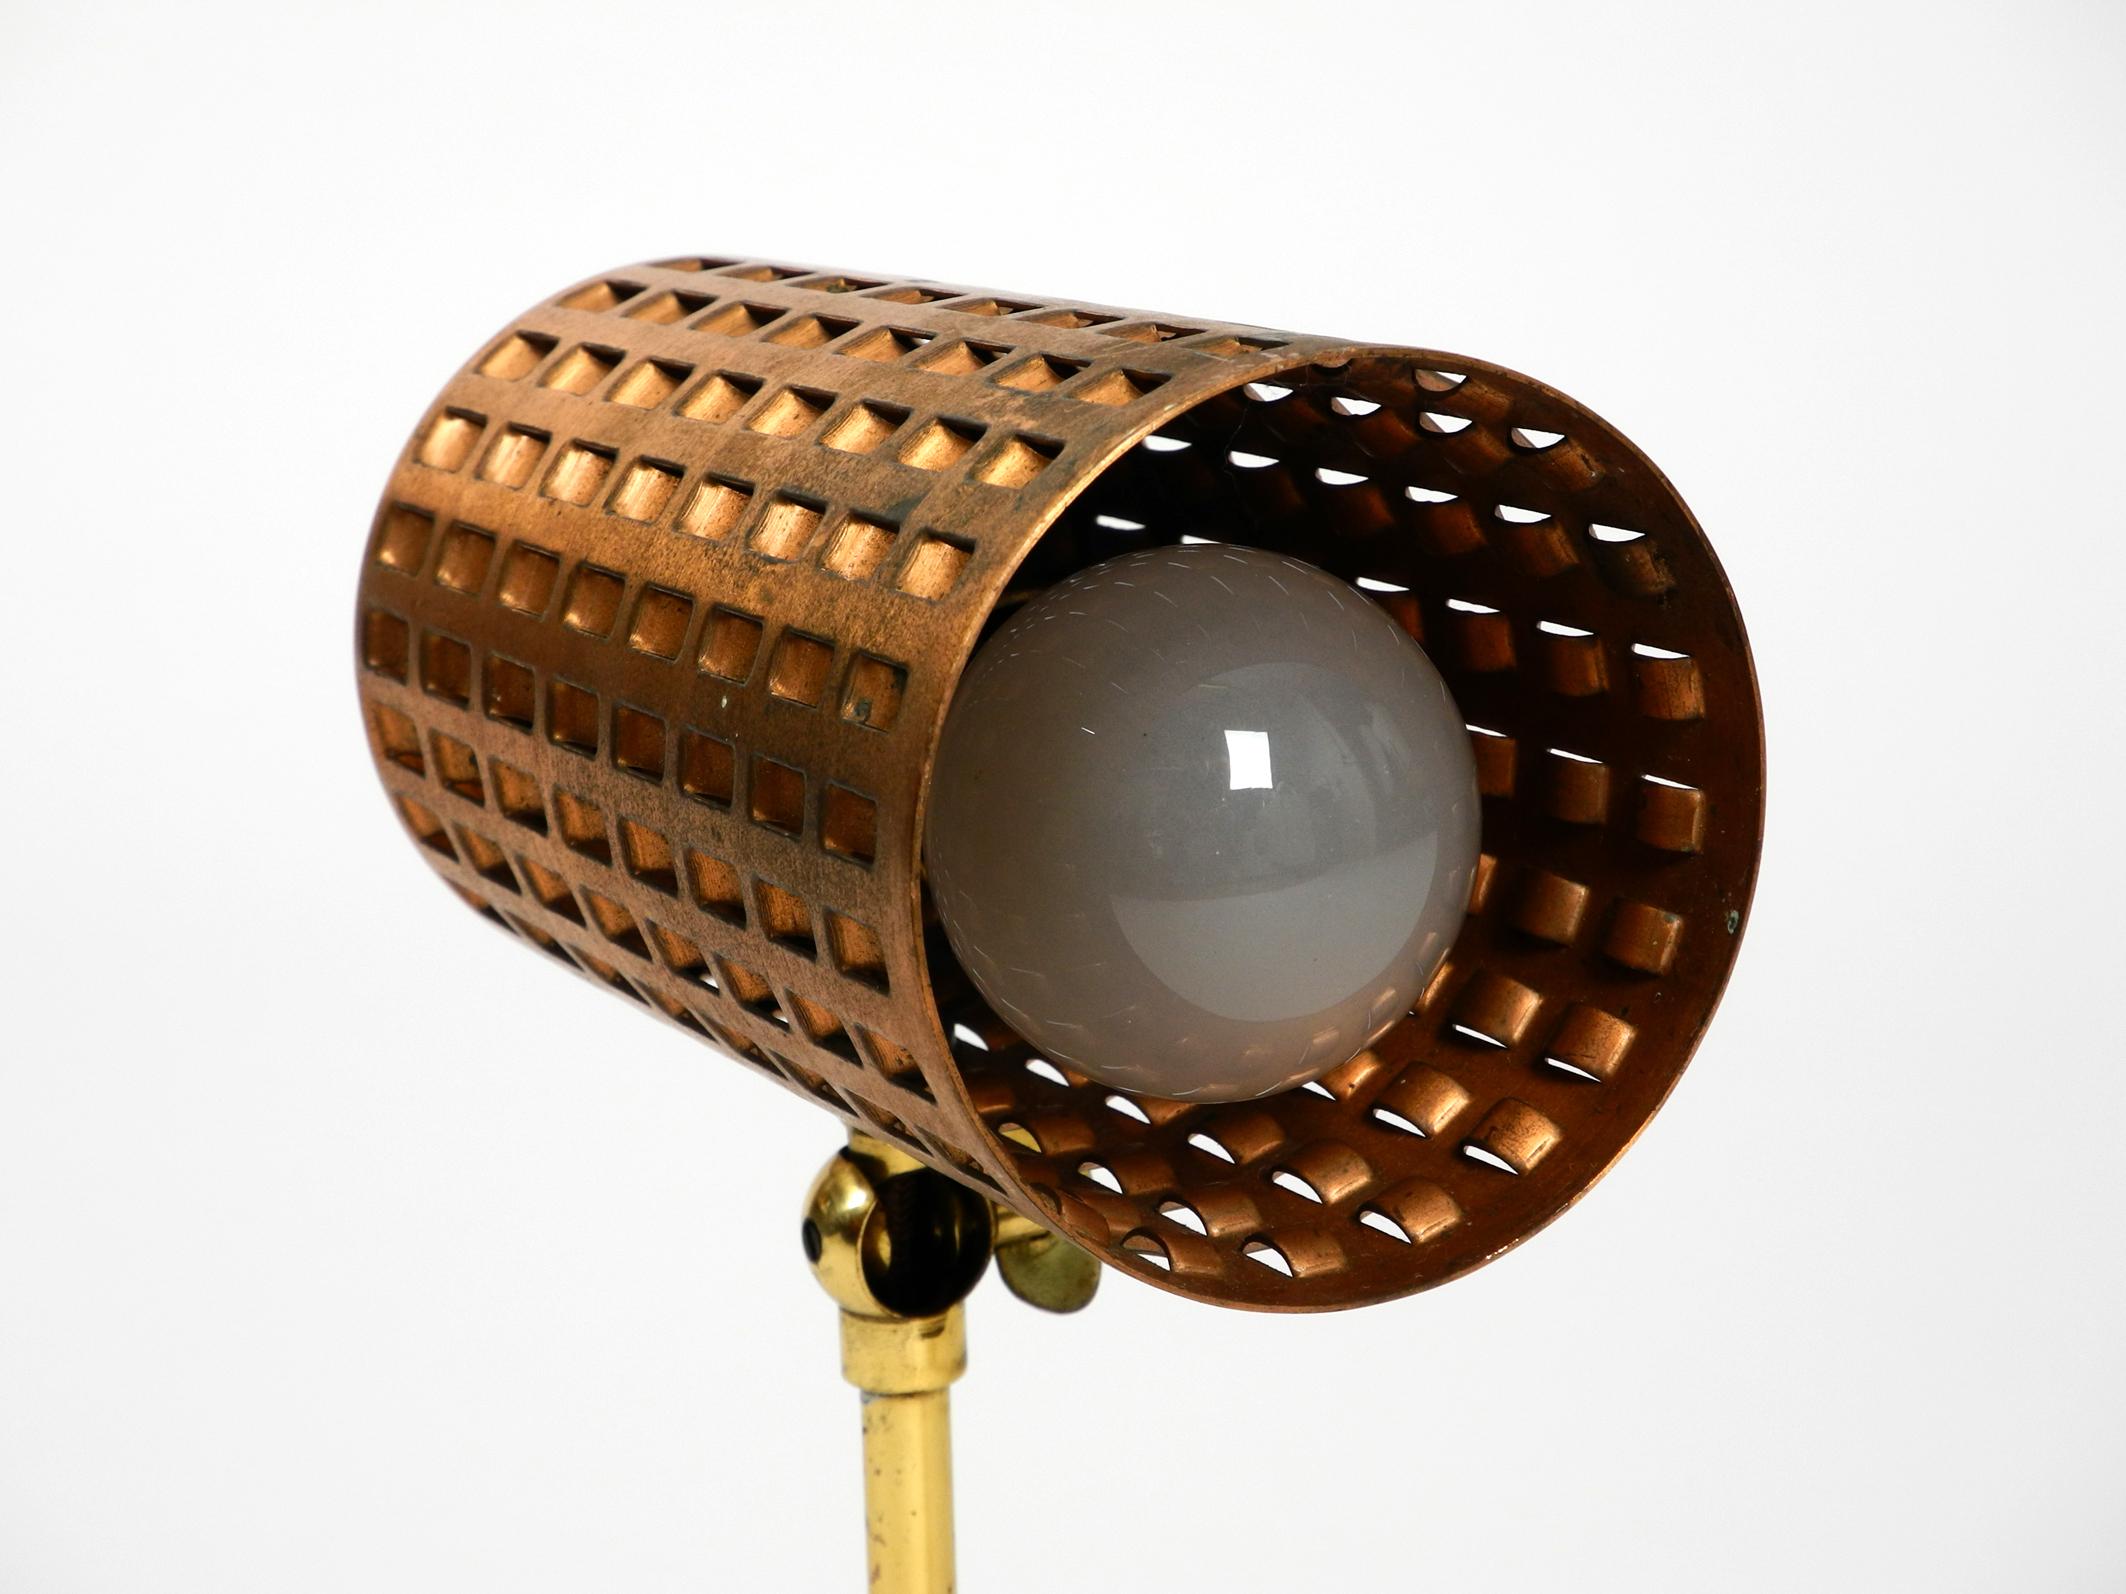 Beautiful Midcentury Table Lamp with Perforated Copper Shade and Teak Wood Base 1